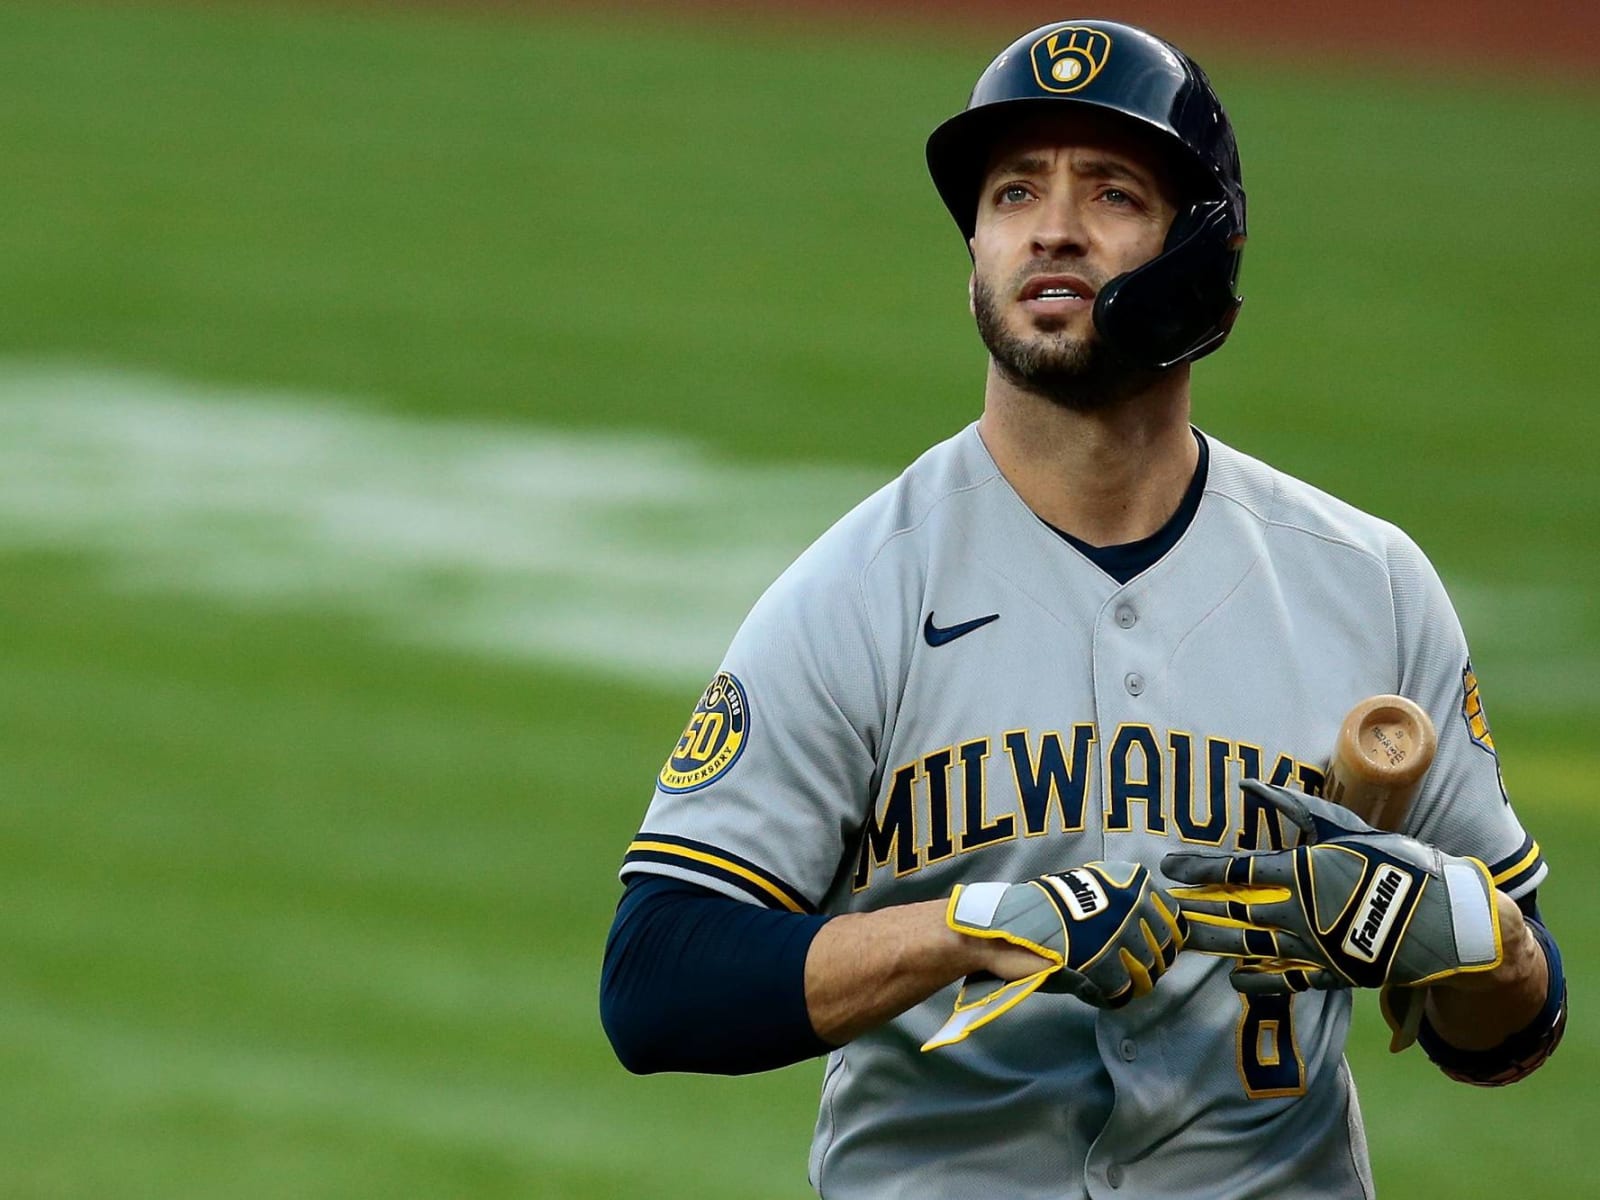 Ryan Braun retires after 14 years with Brewers